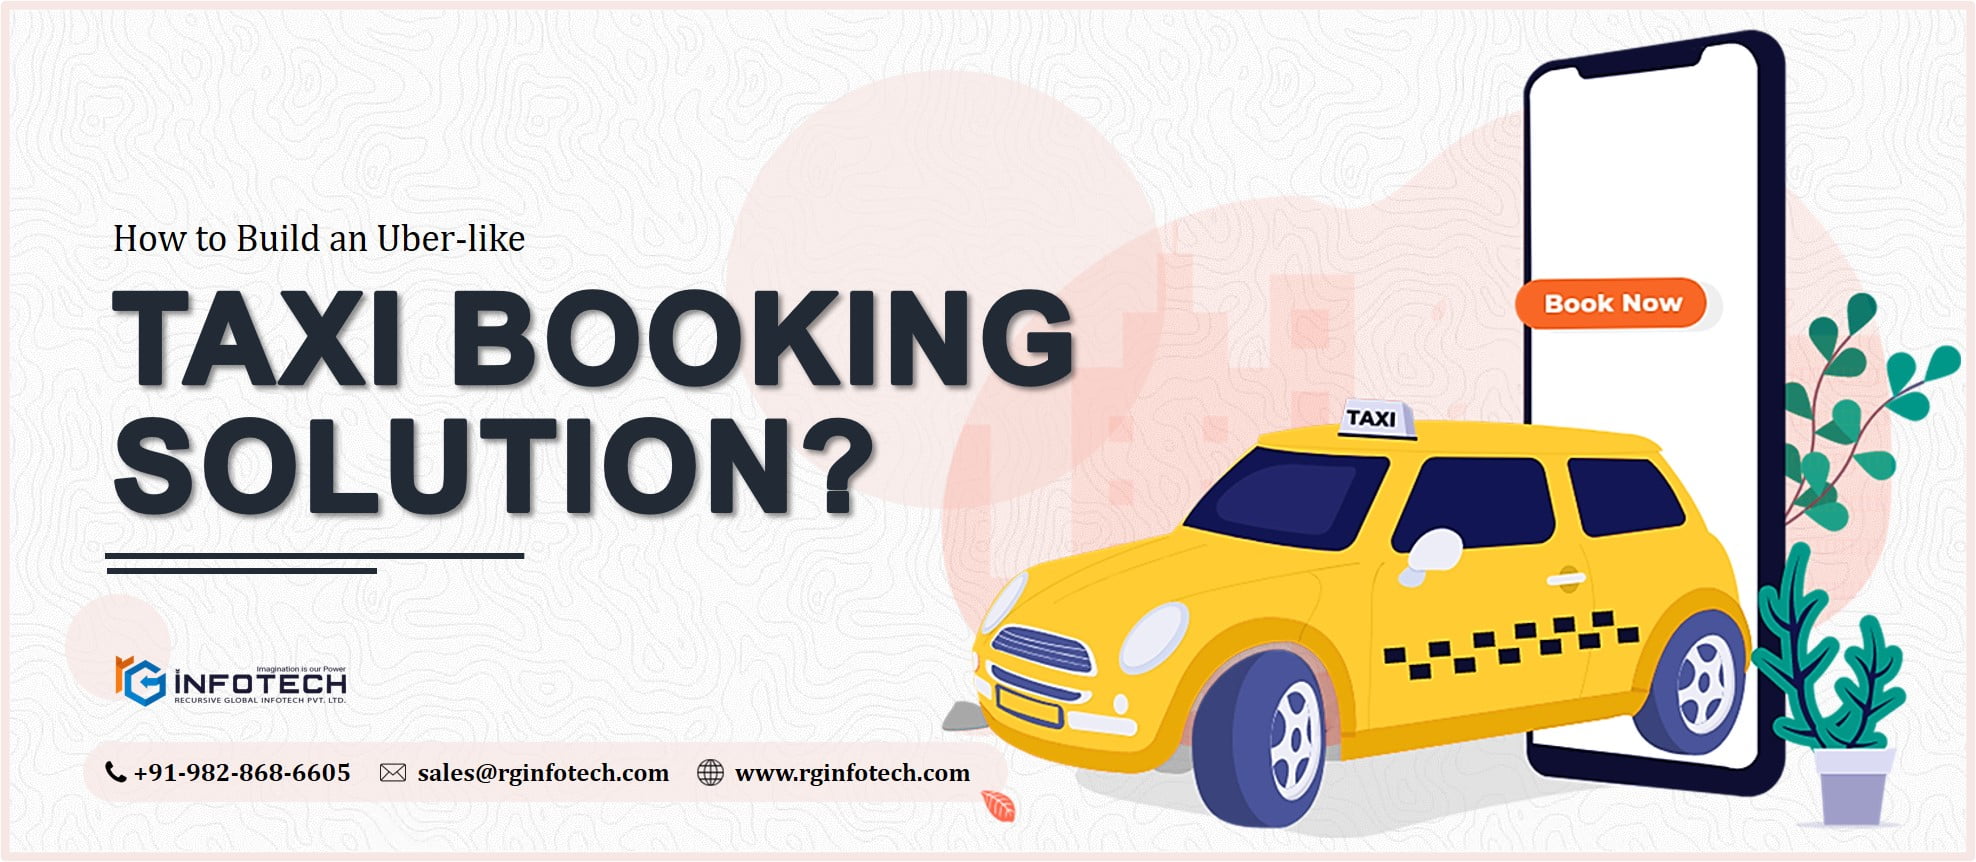 Blog_Taxi Booking Solution